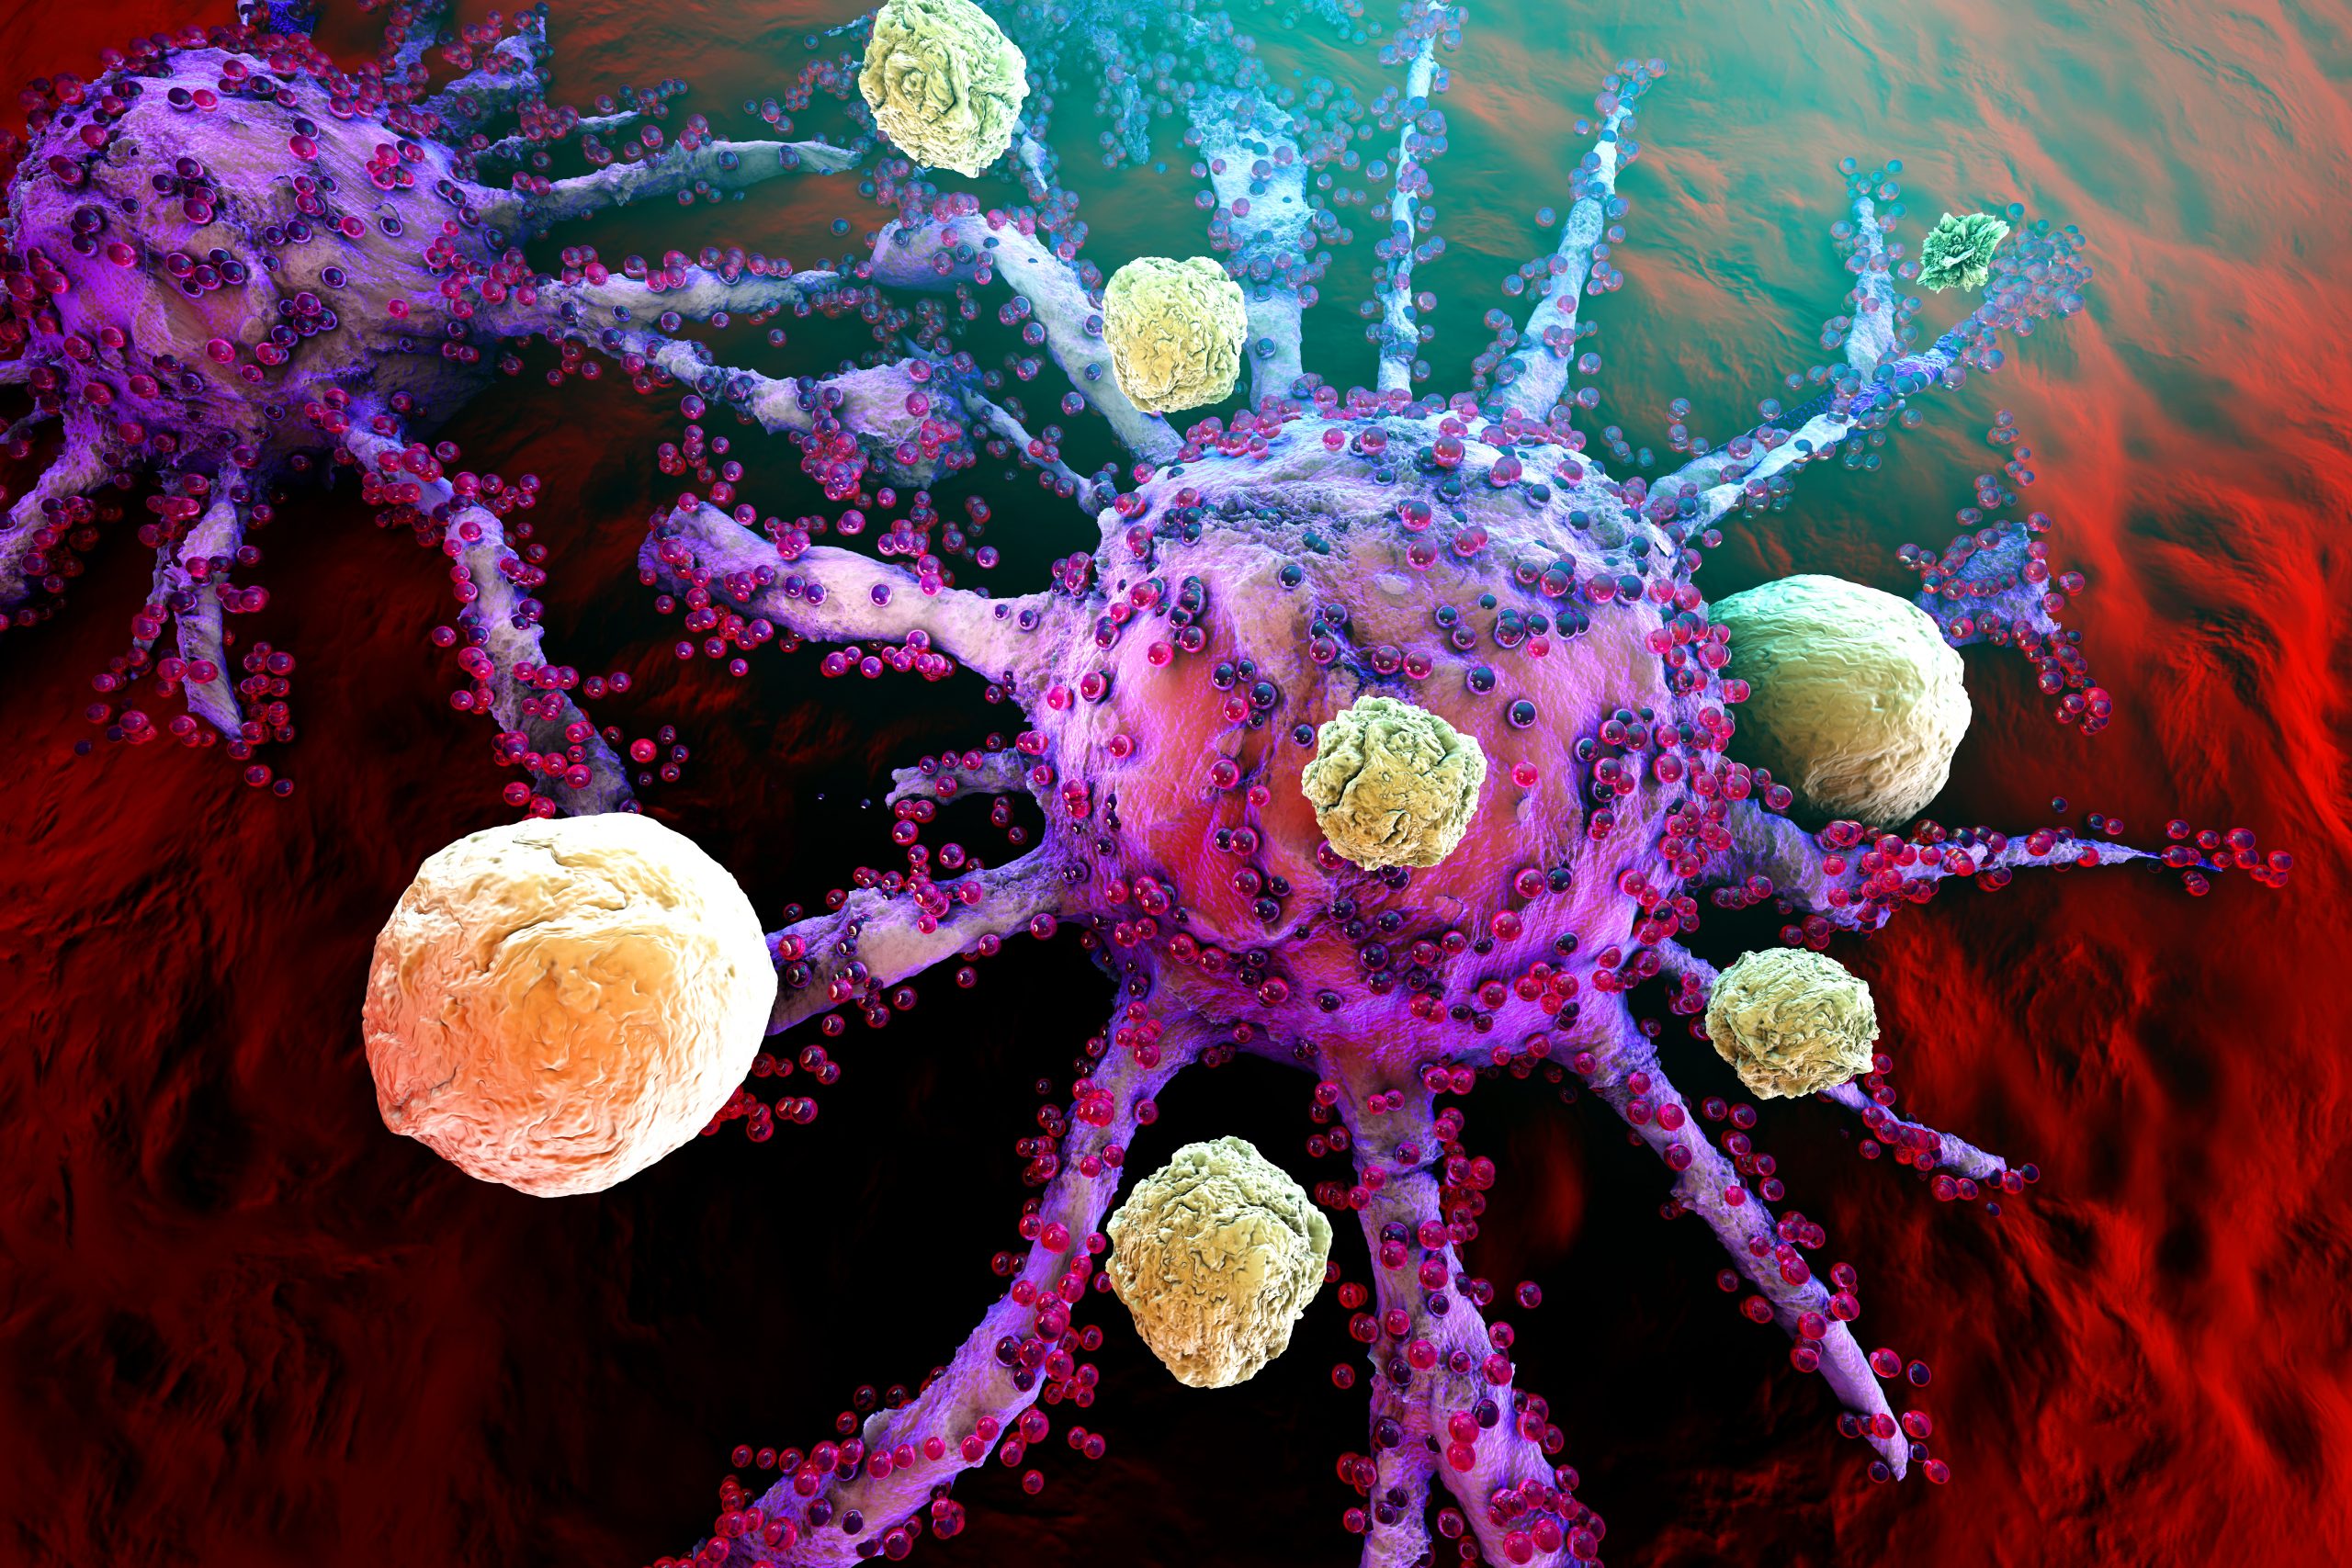 What is Immunotherapy?